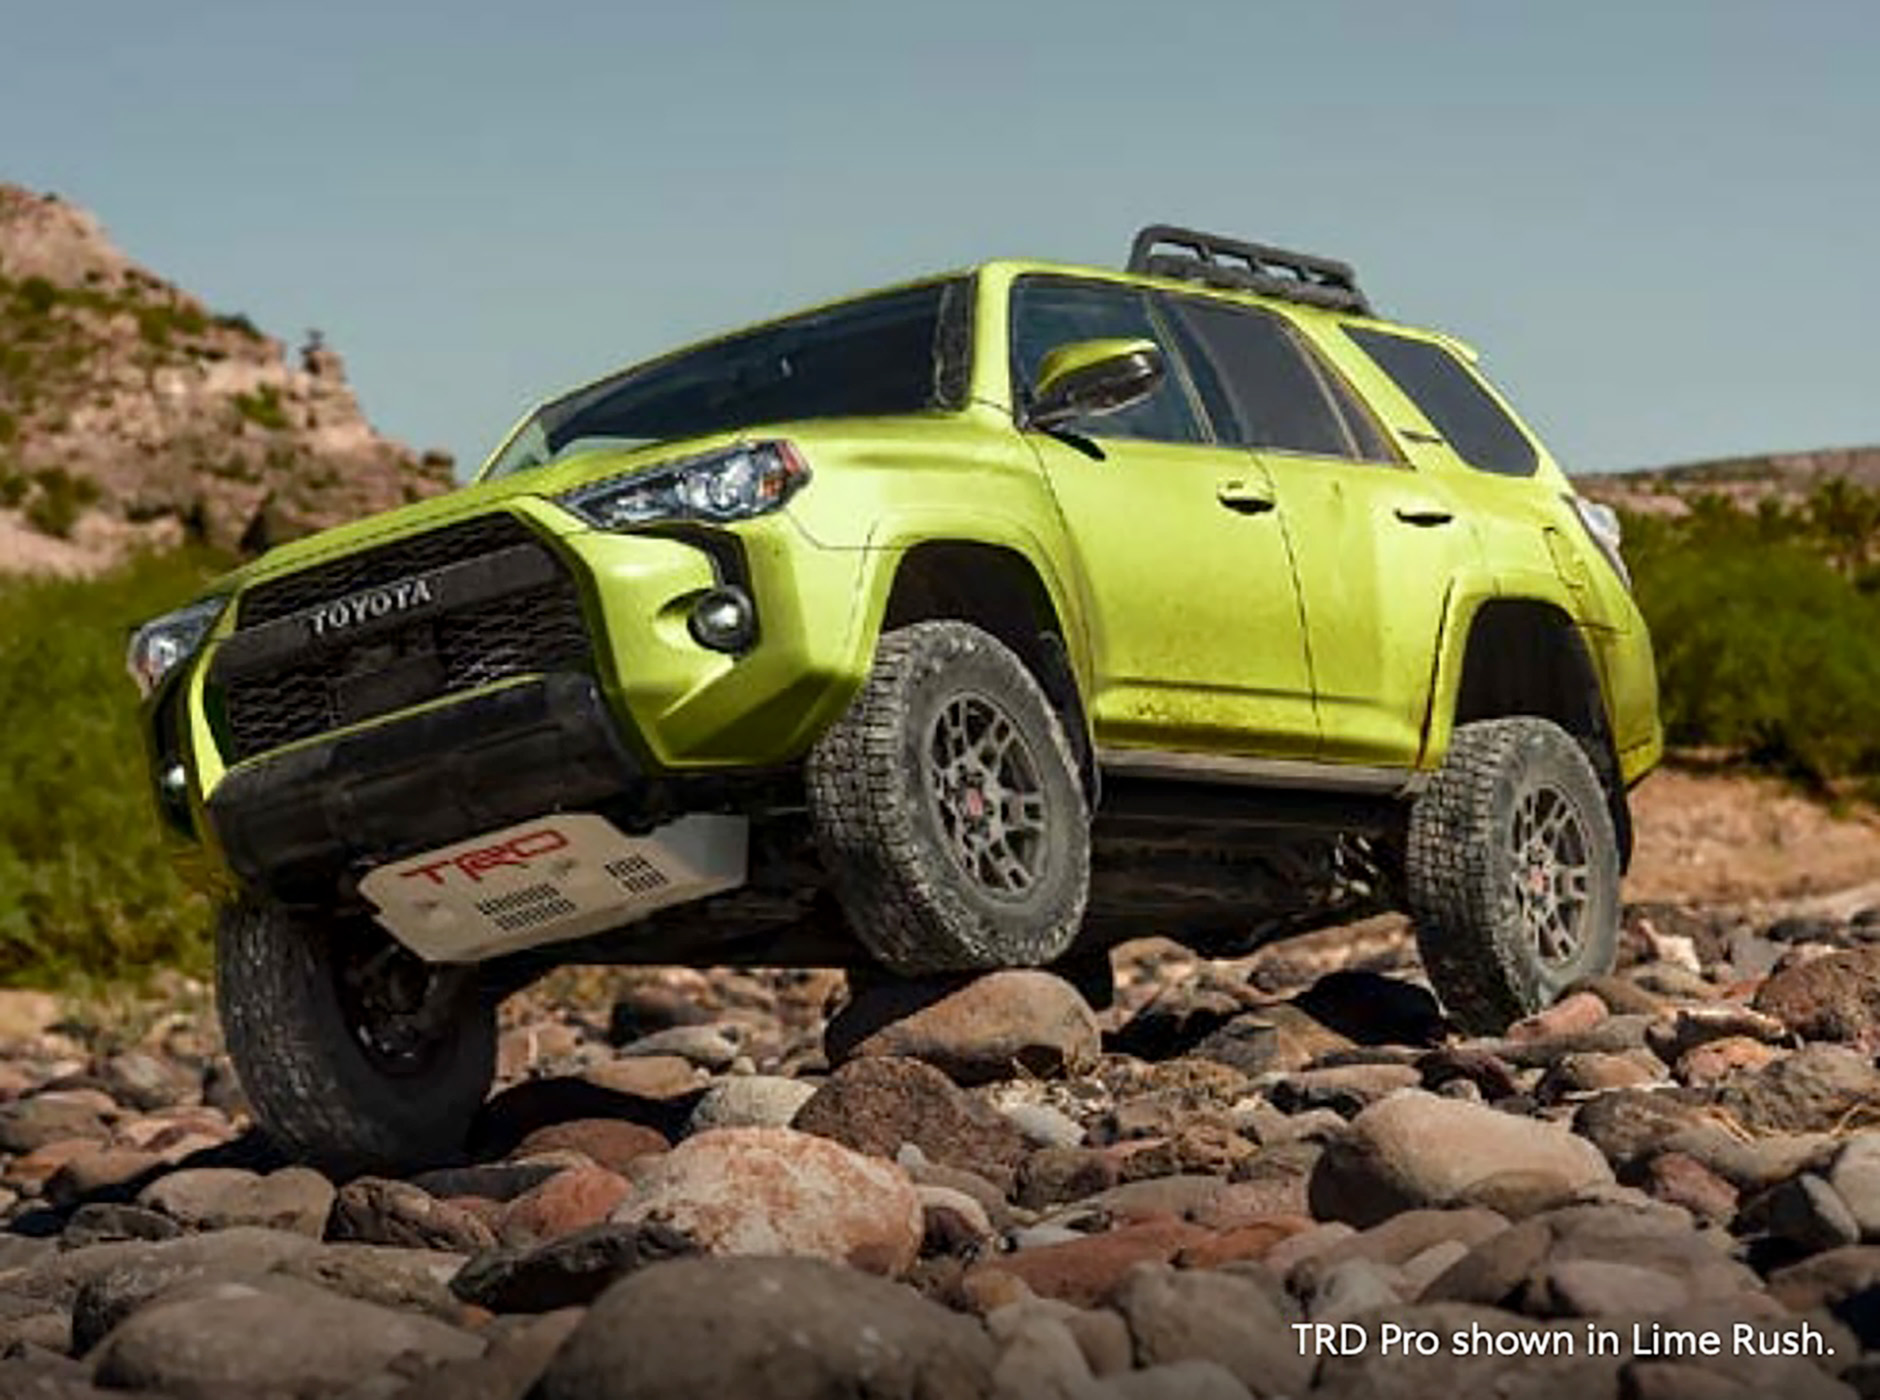 Toyota Publishes 2022 4Runner Lineup Info, Including New Lime Rush TRD